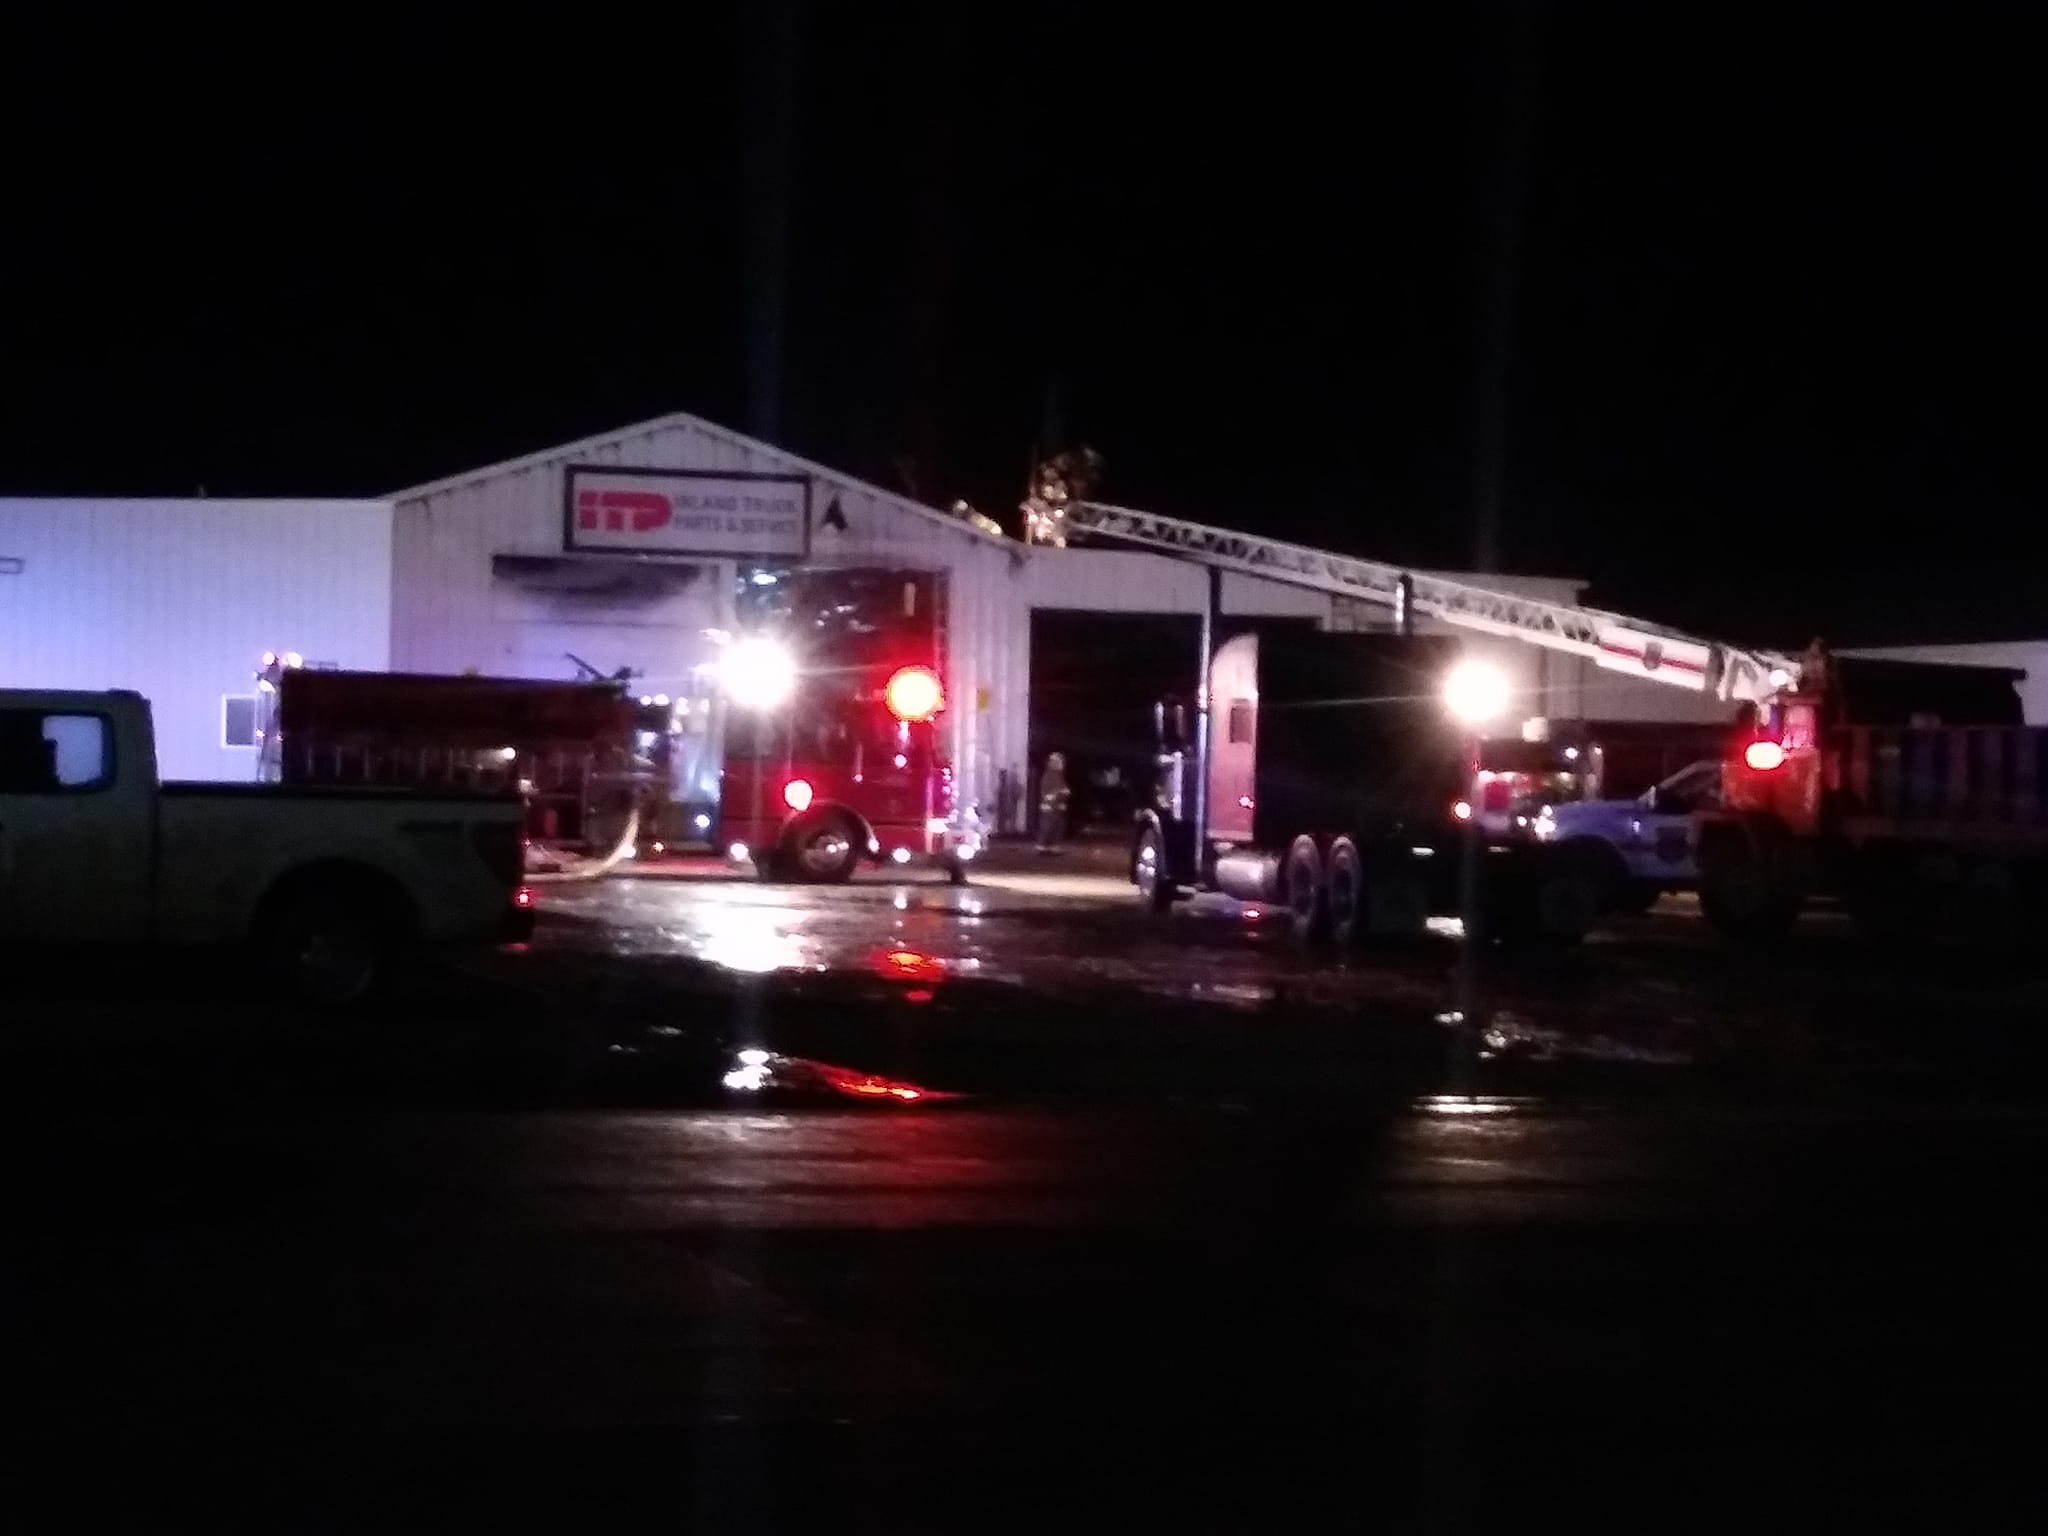 Fort Pierre Business Damaged By Tuesday Morning Fire